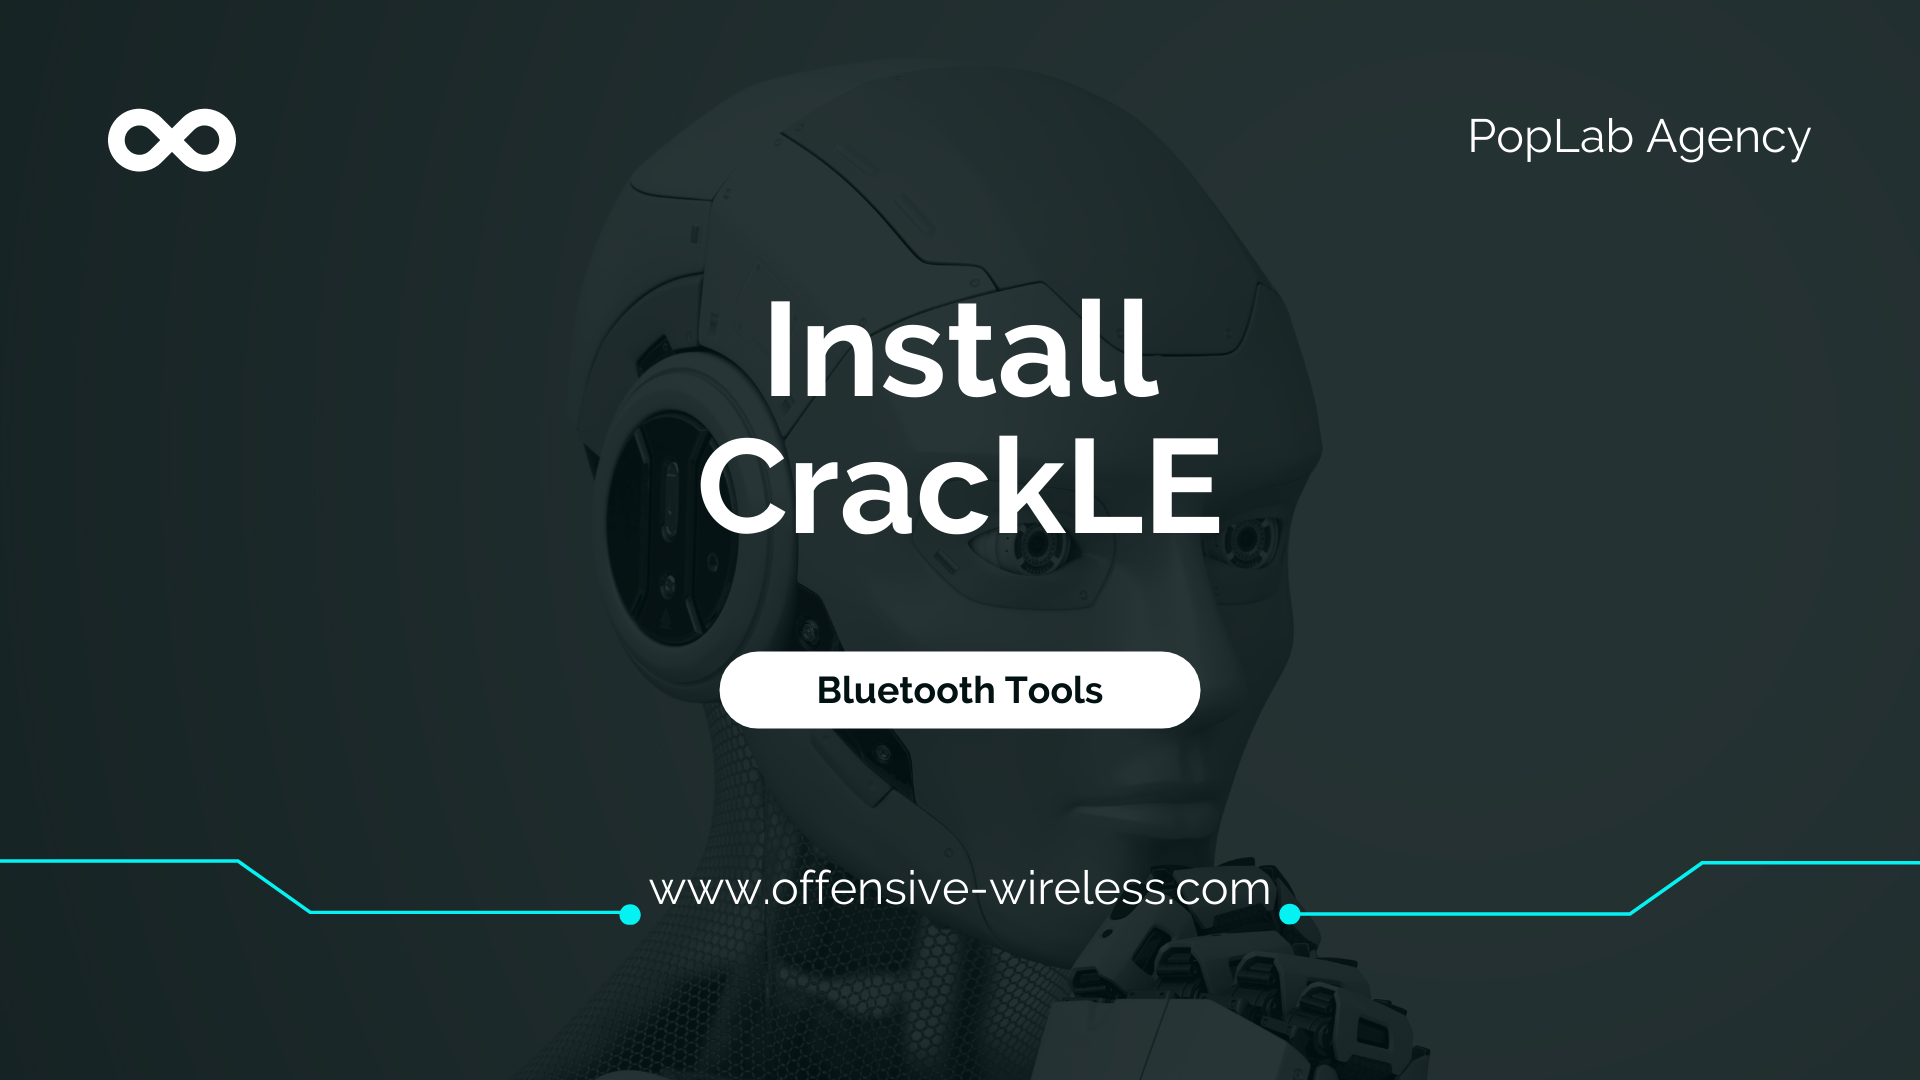 Install CrackLE